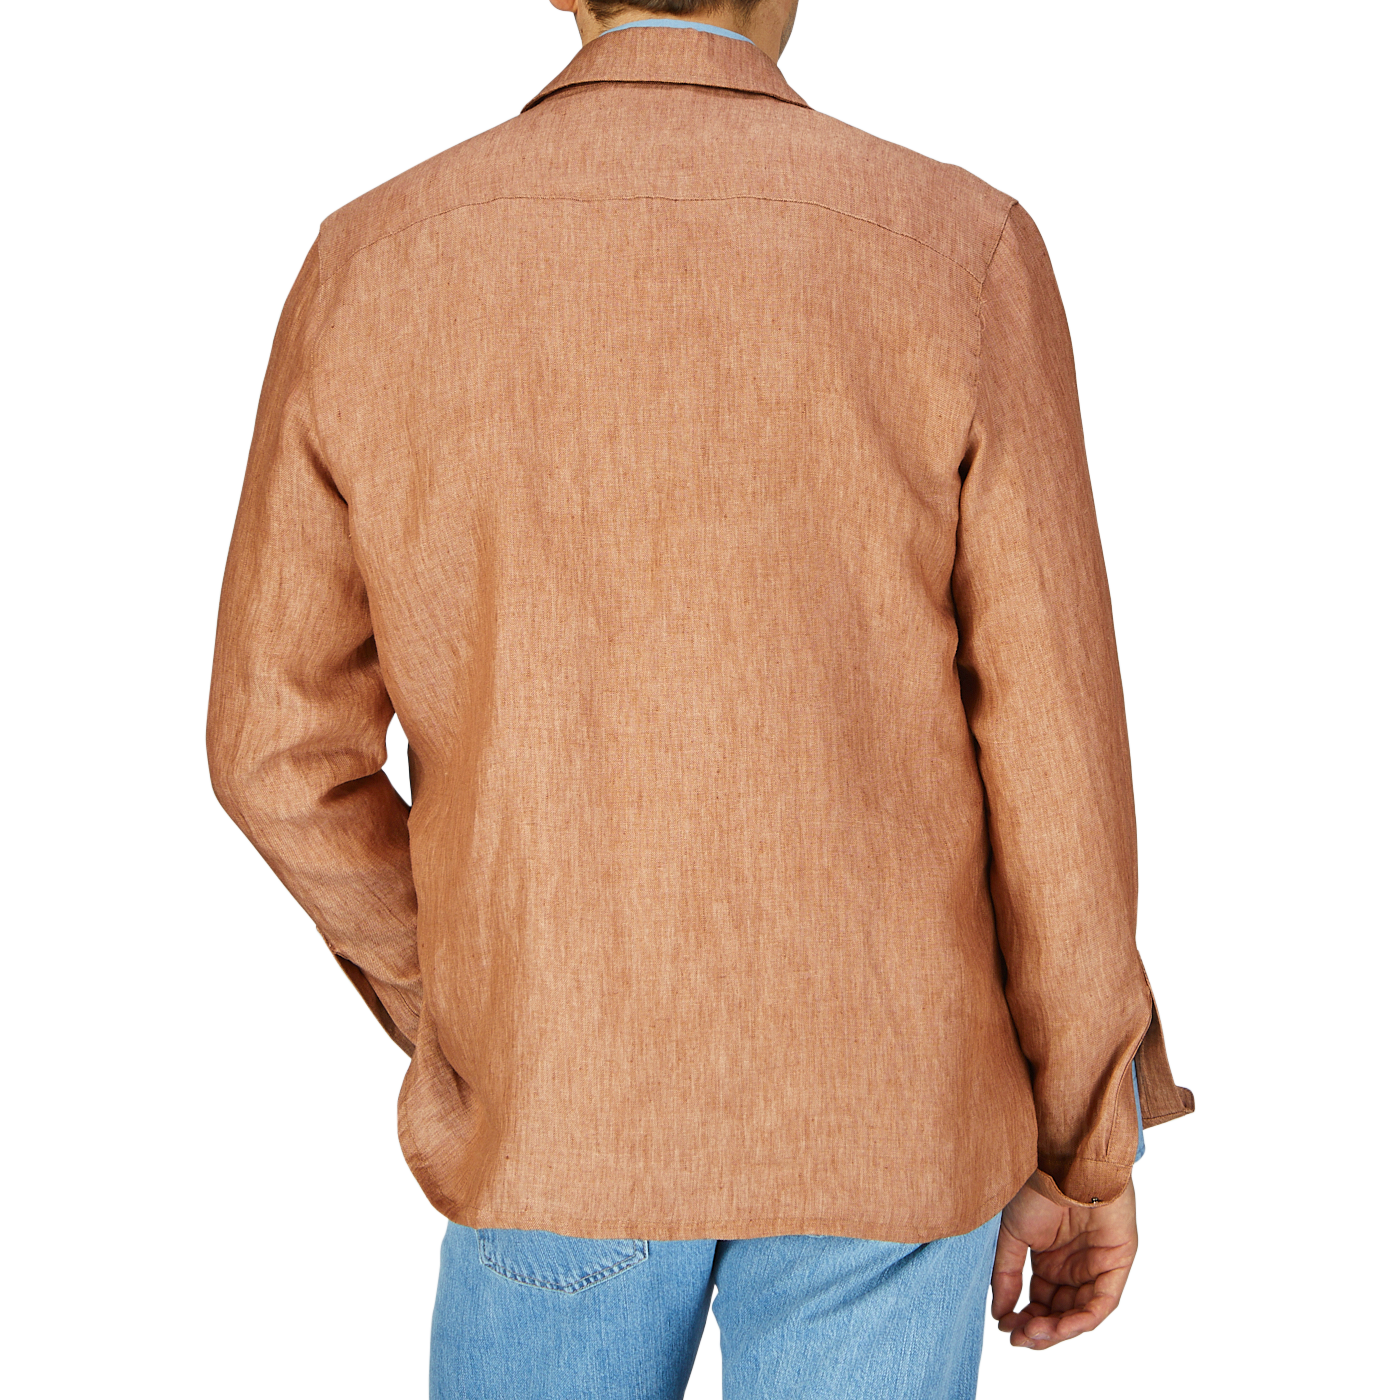 Rear view of a person wearing a terracotta brown Mazzarelli organic linen overshirt and blue jeans.